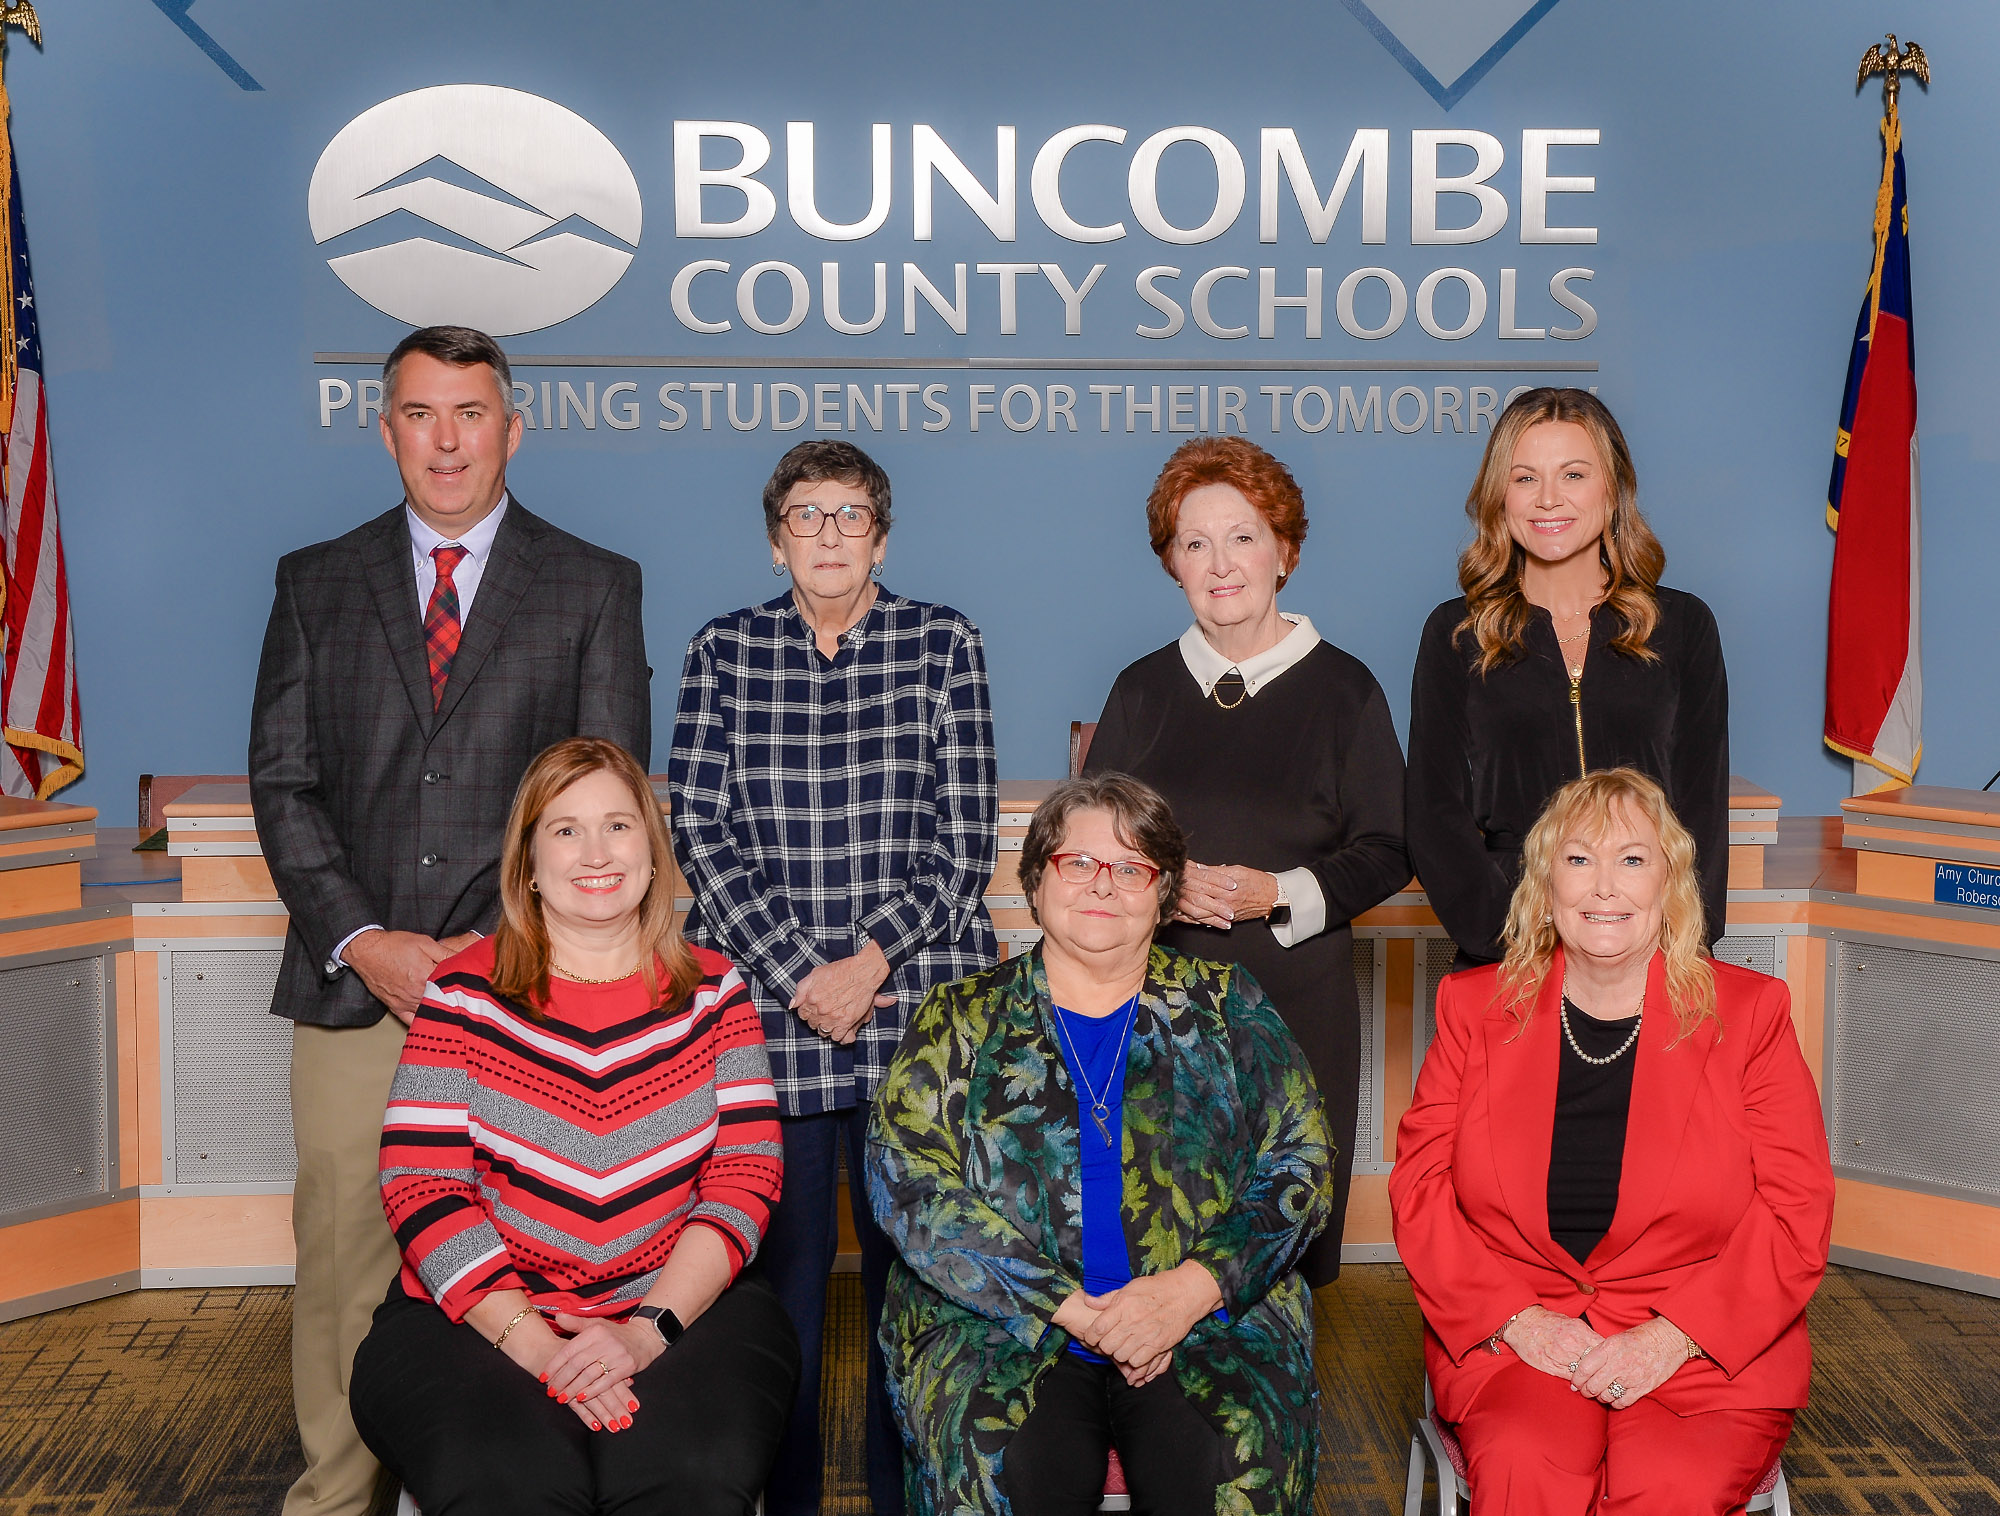 The Buncombe County Board of Education poses in their board meeting room.